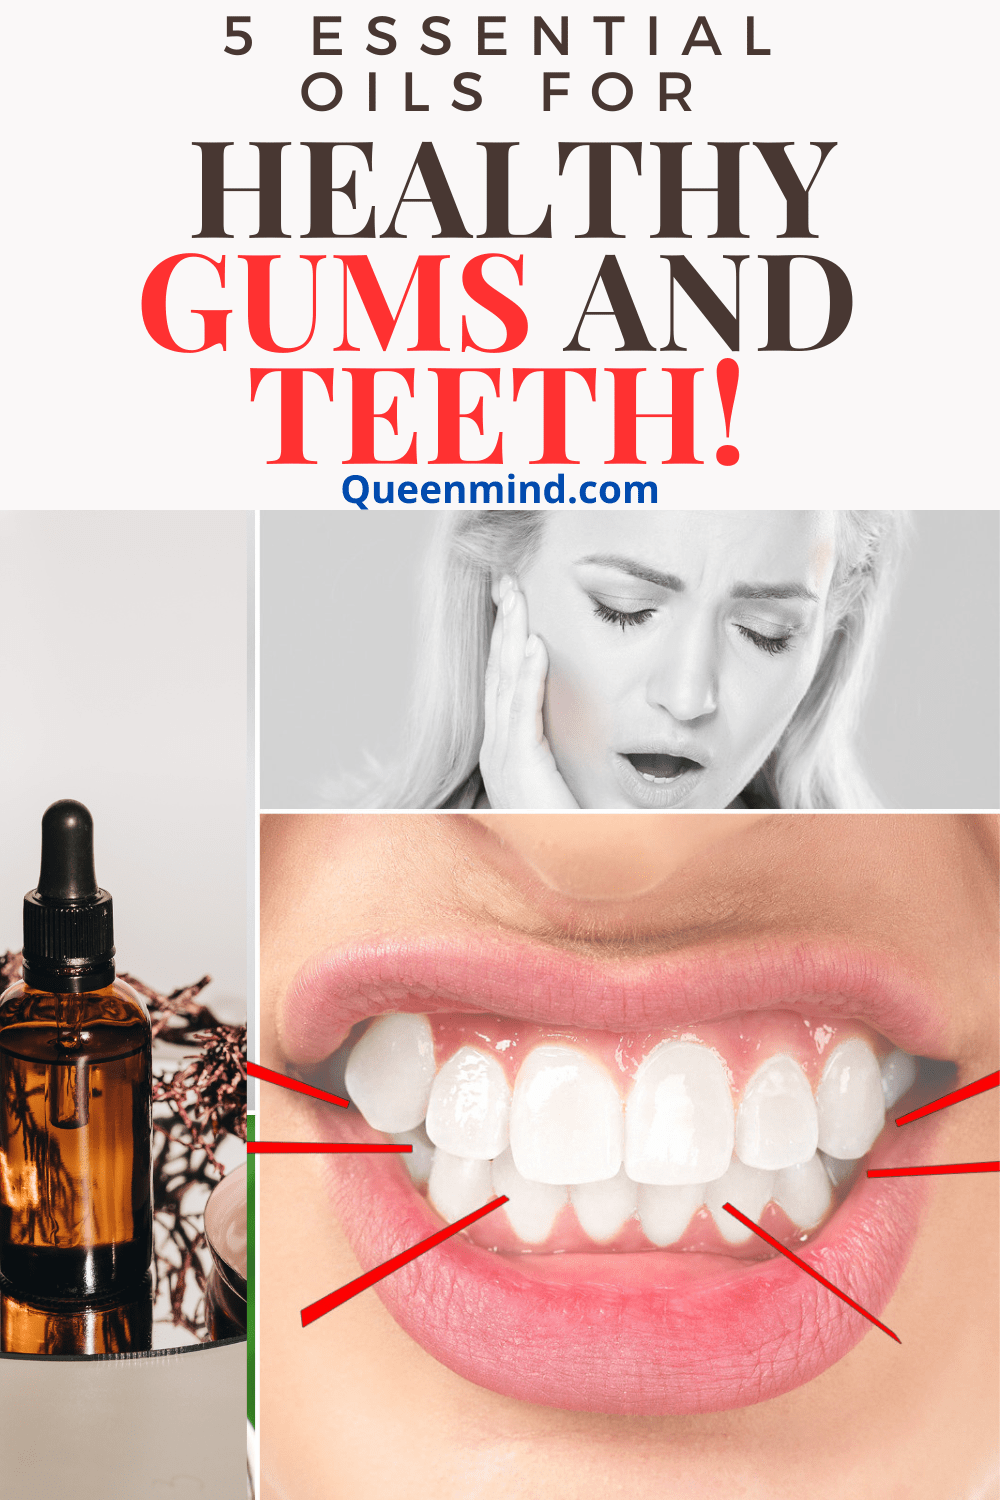 Did you know that before dentists, people were using essential oils? These 5 Essential Oils That Keep Gums And Teeth Healthy are very effective.Taking care of our teeth is extremely important.